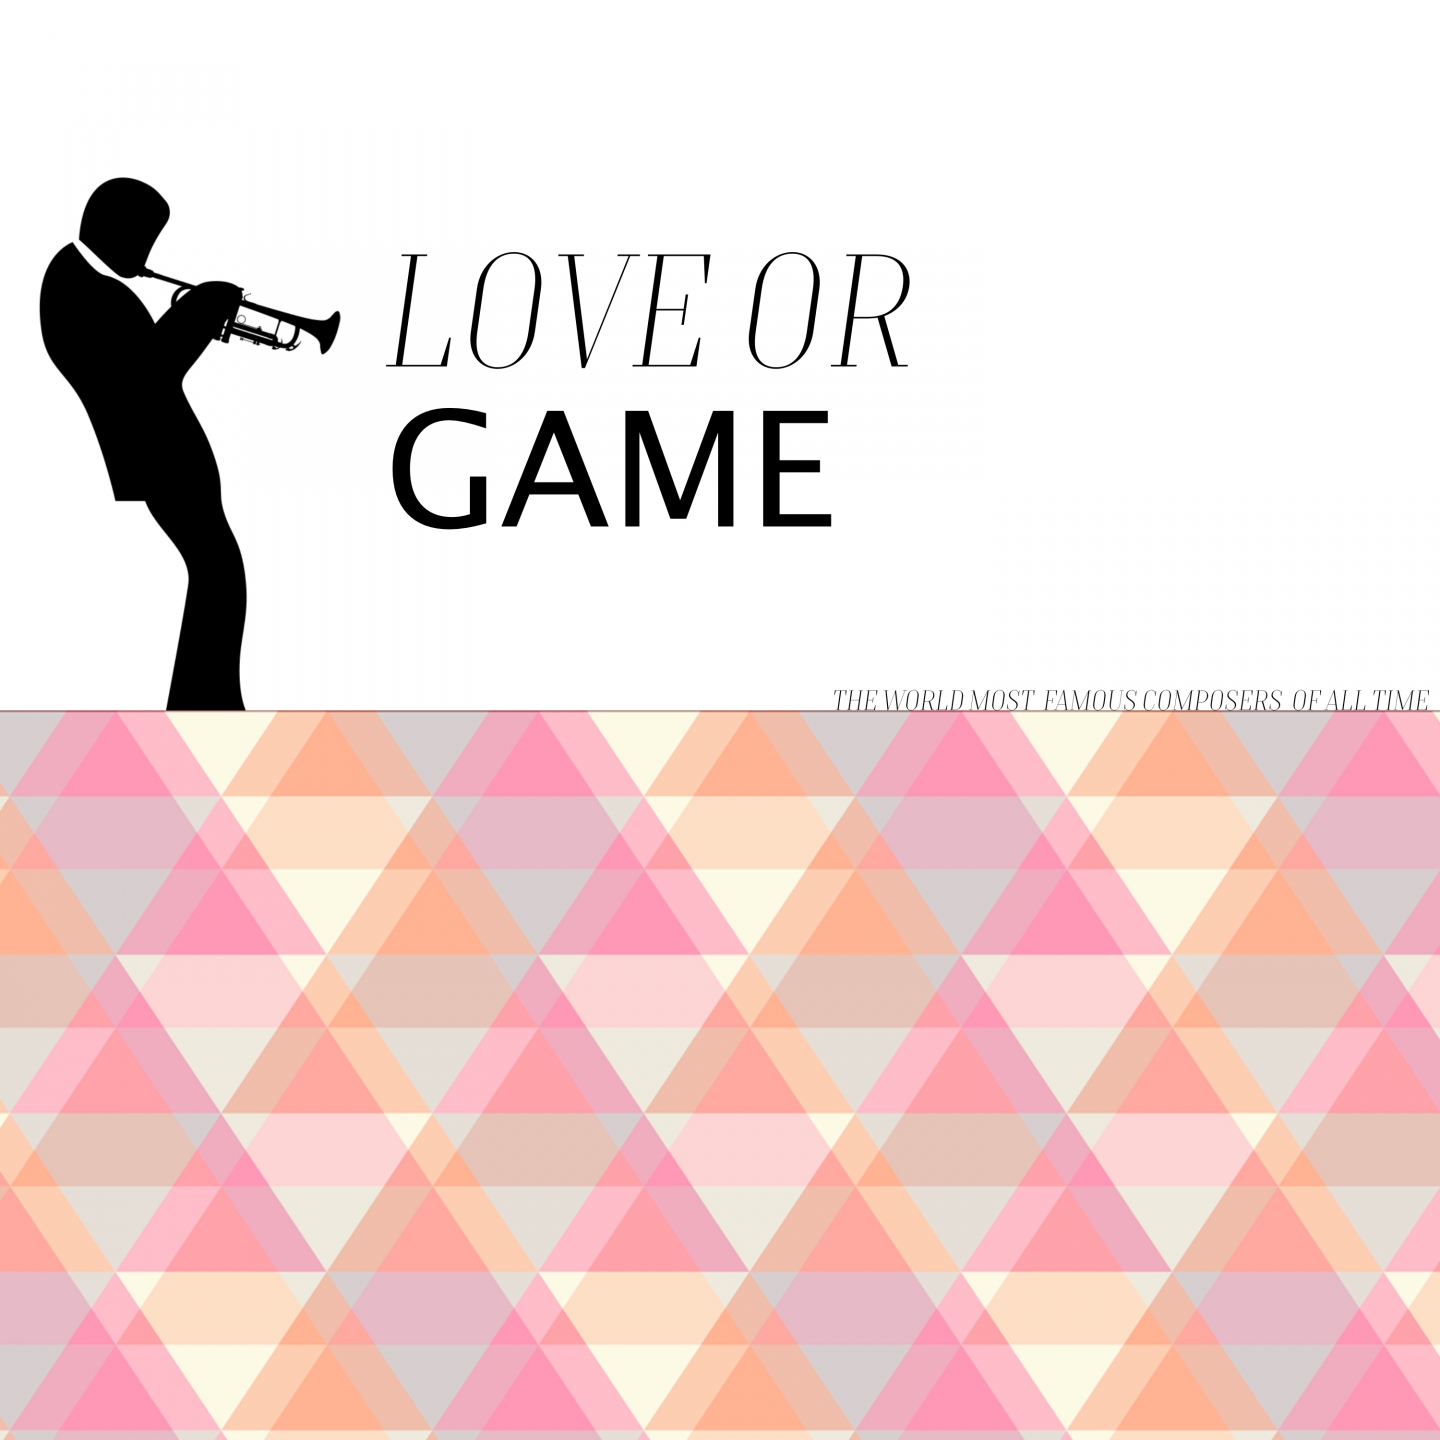 Love or Game